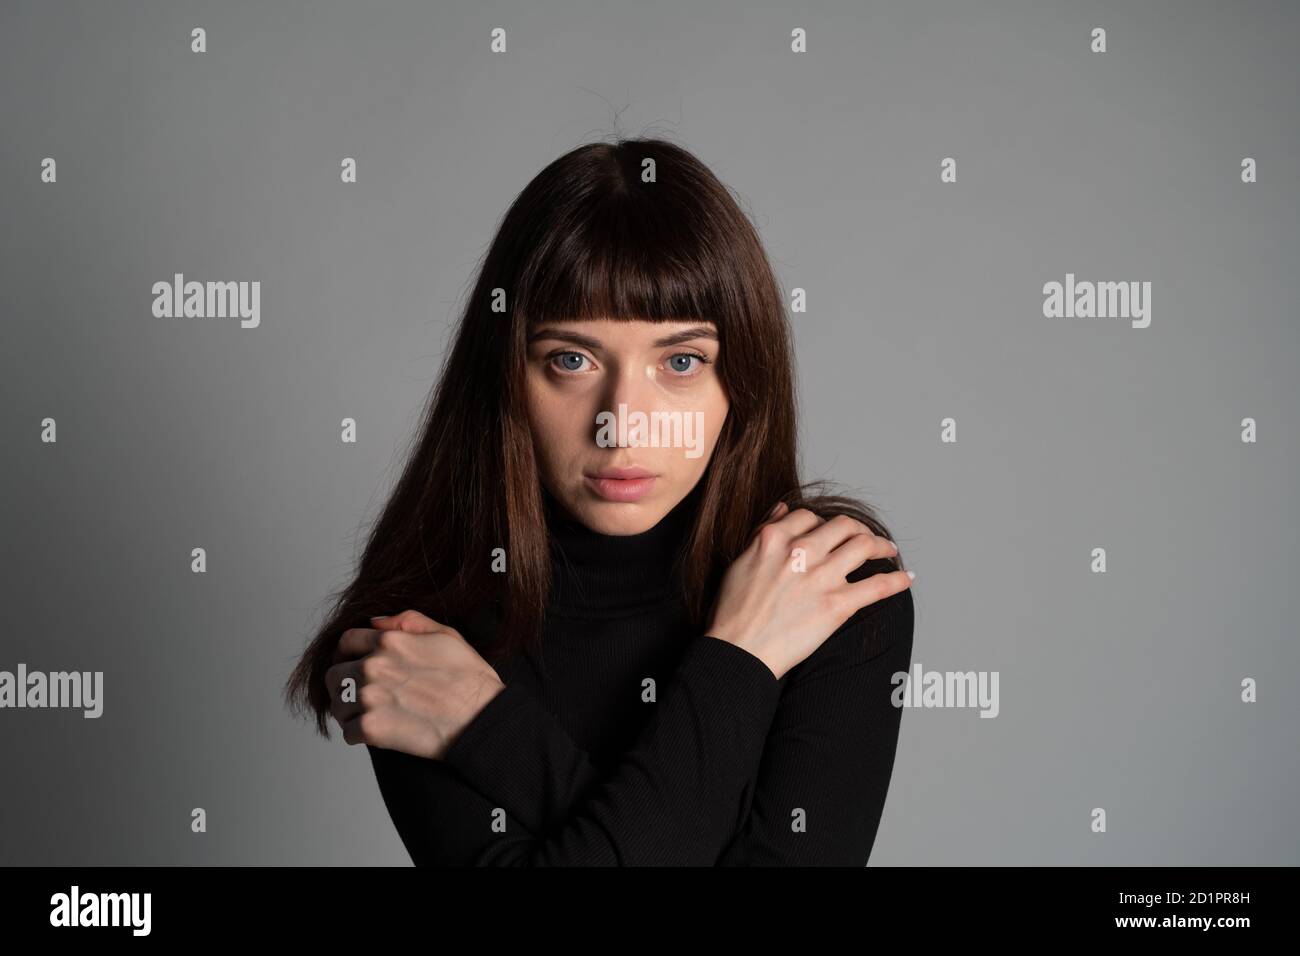 Close up studio portrait of a pretty brunette woman, wearing folded black polo-neck sweater, hands on shoulders, looking at camera, against a plain gr Stock Photo